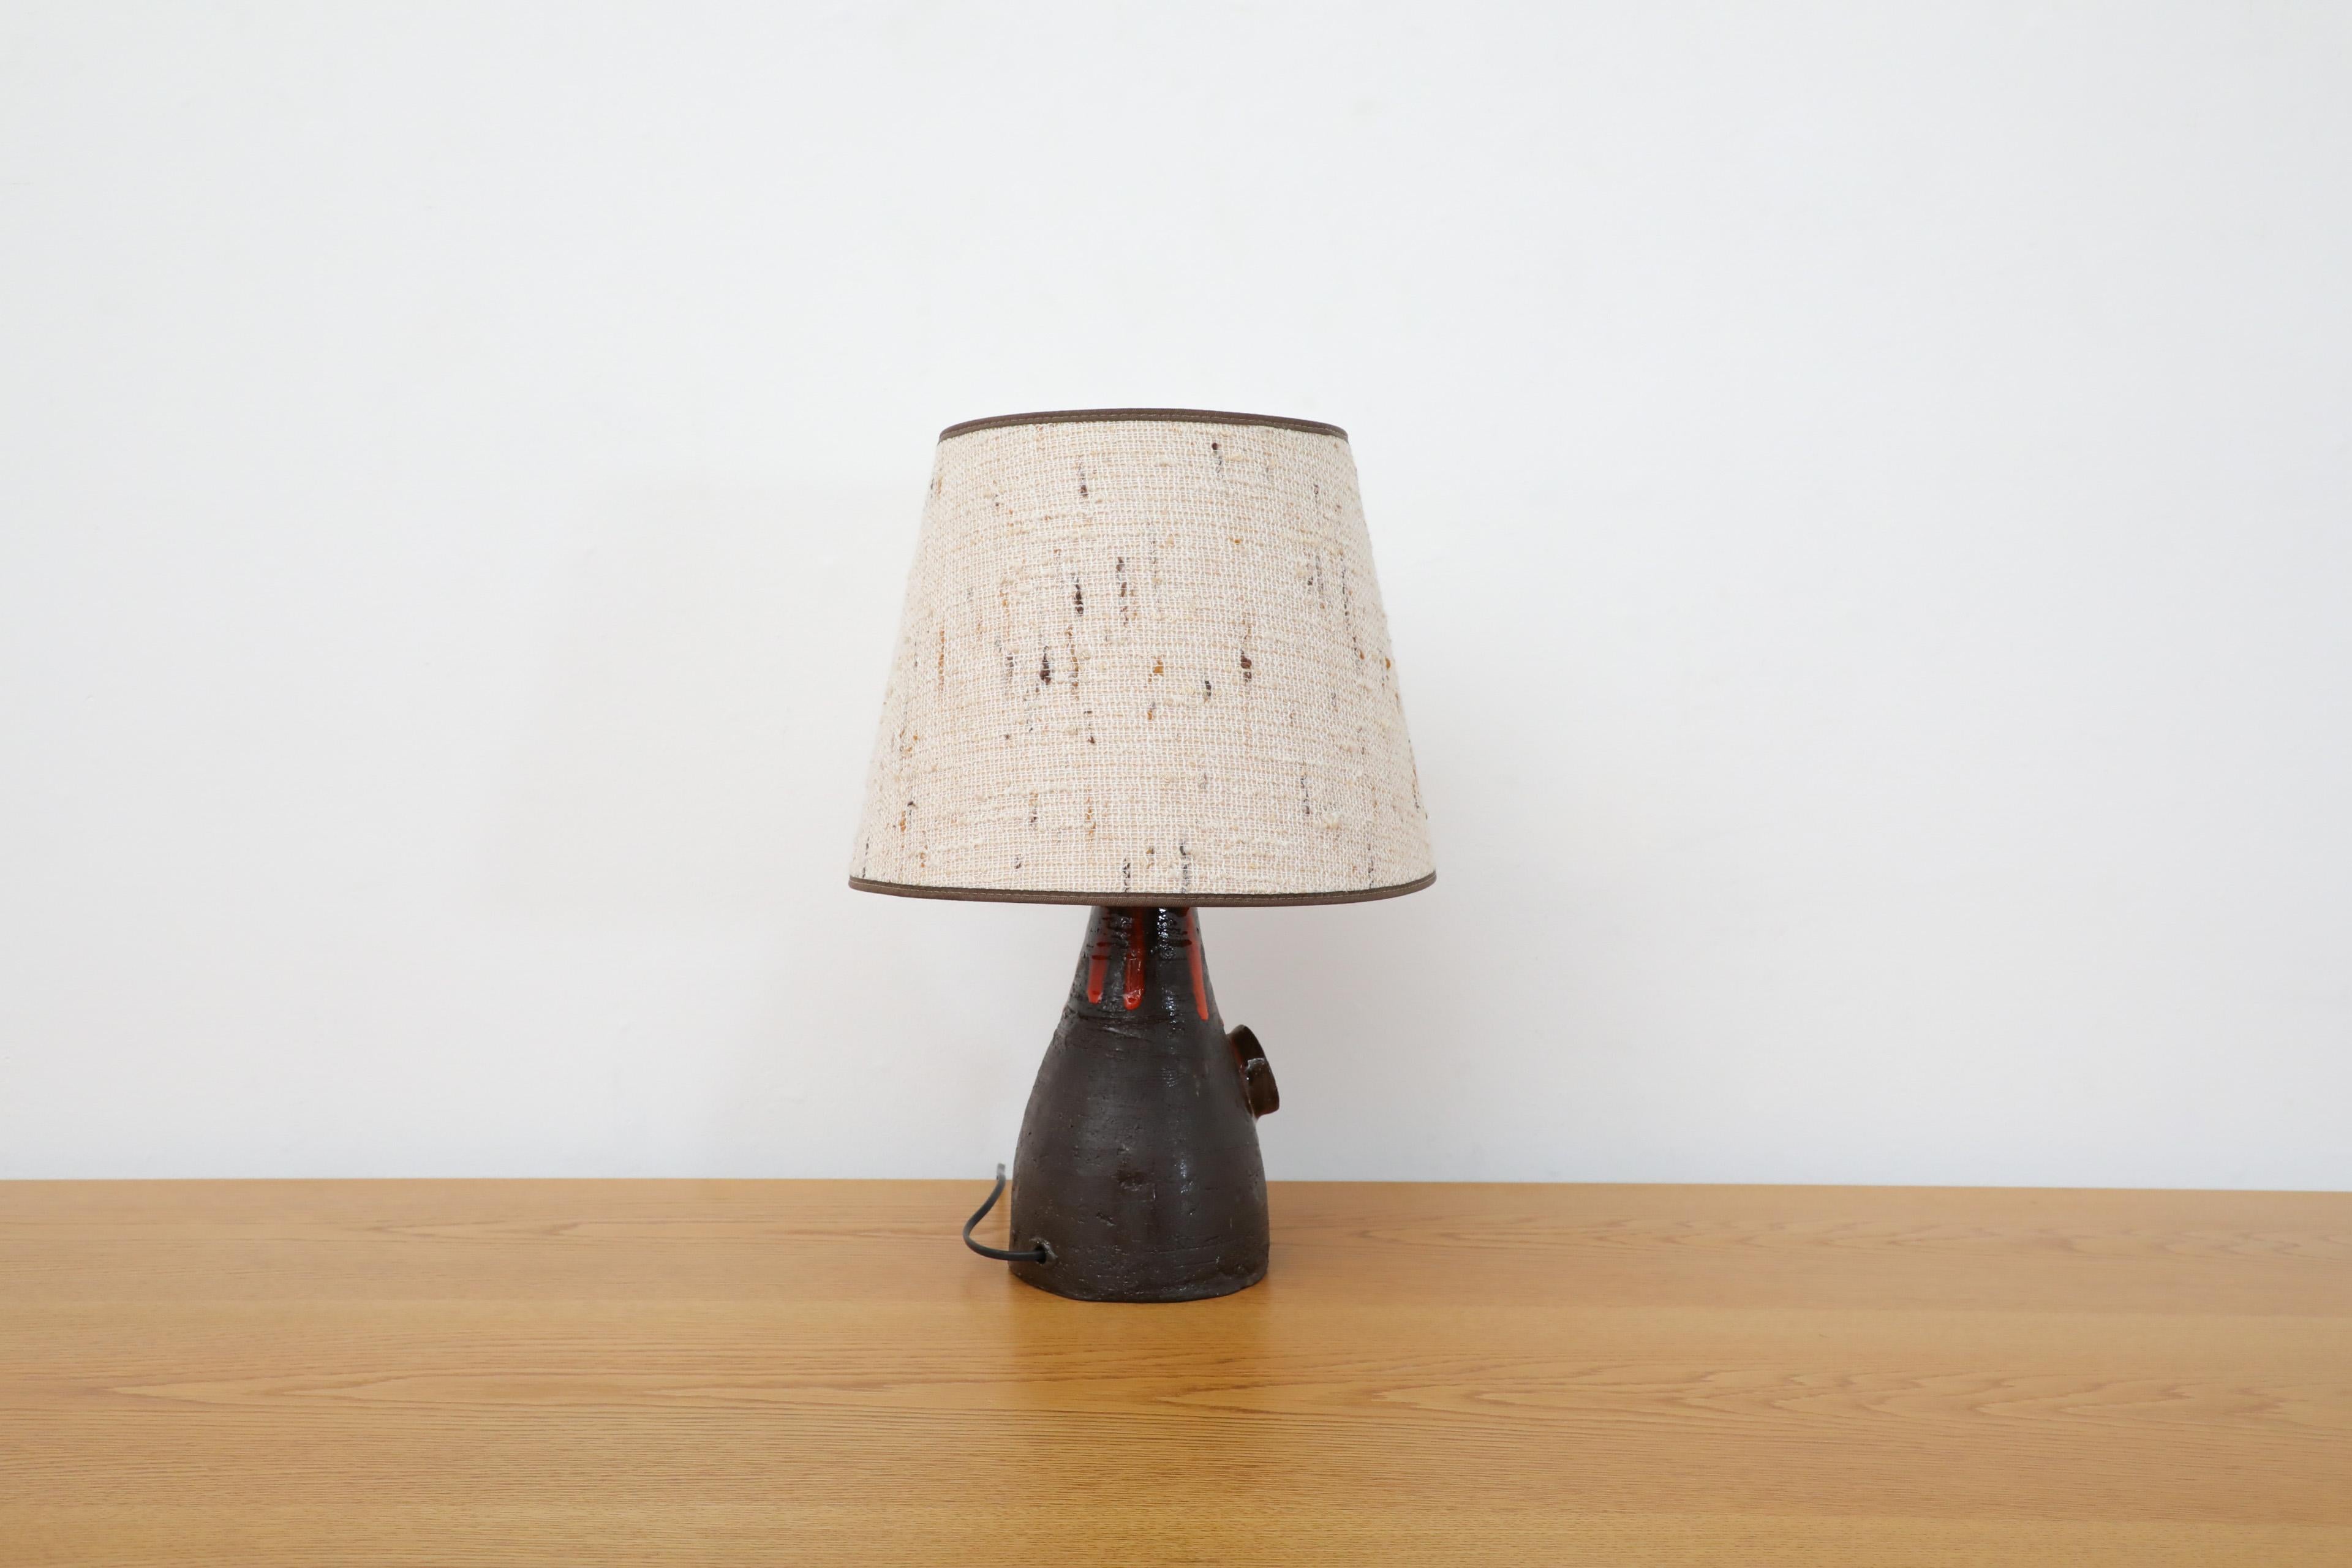 Mid-20th Century Dutch Mid-Century Black Ceramic Volcanic Table Lamp w/ Red Dripping Effect Glaze For Sale